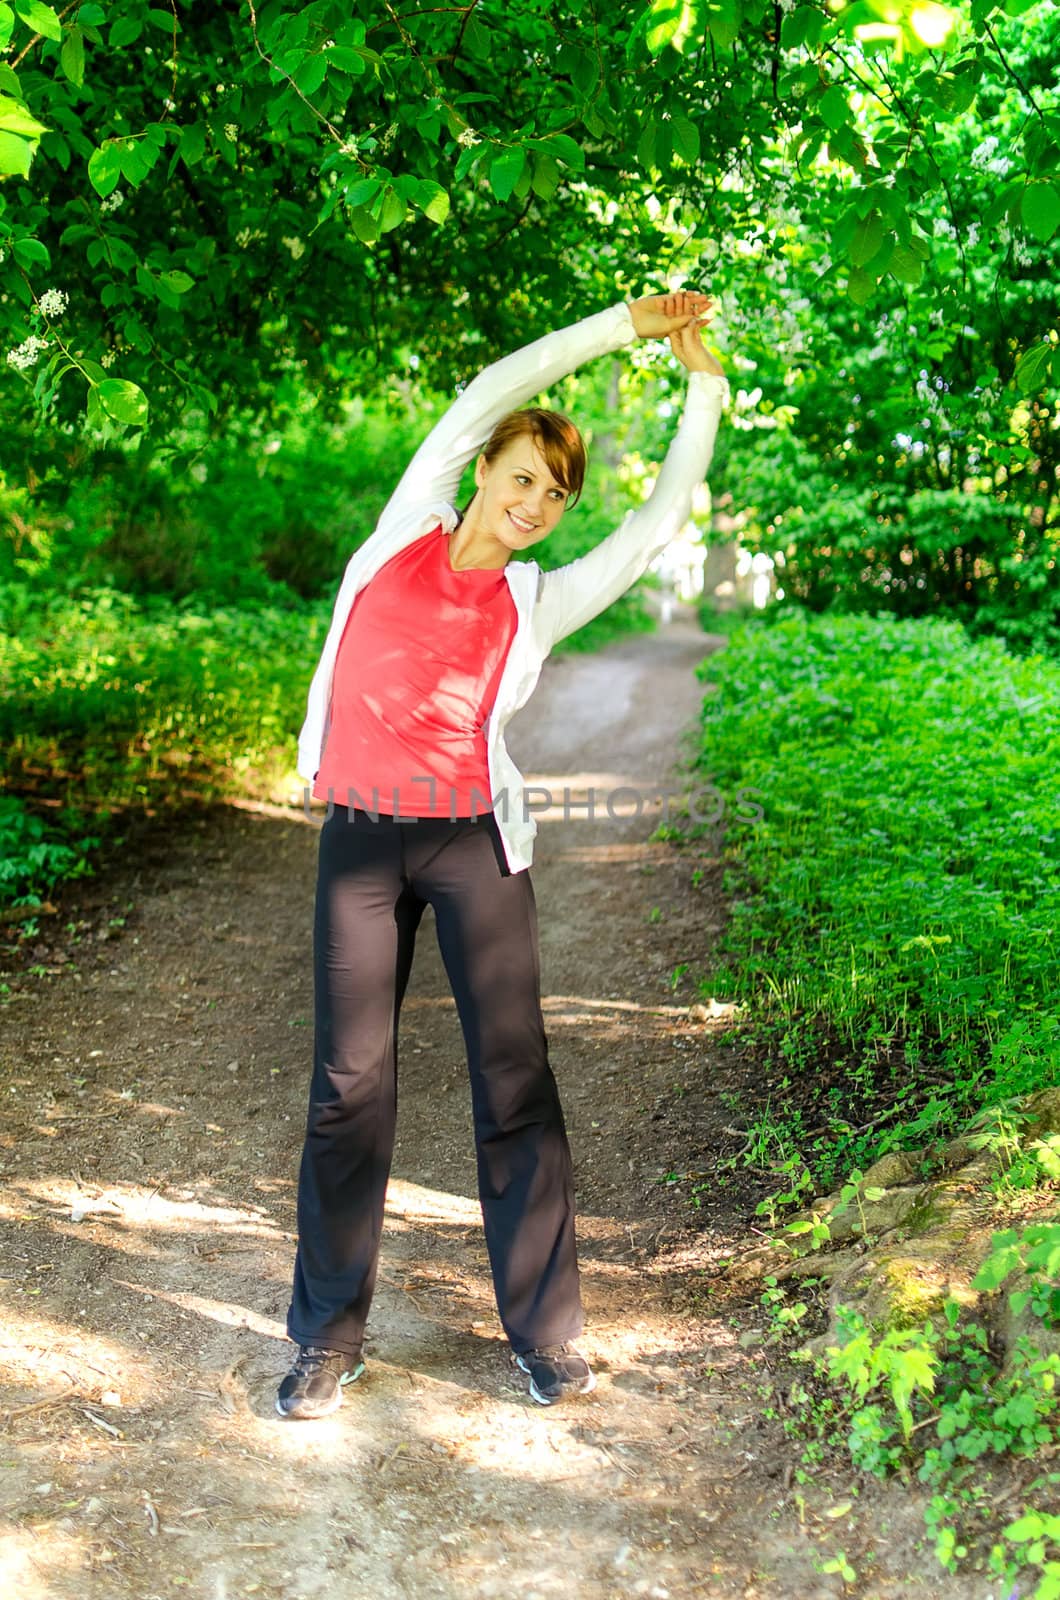 Attractive young woman stretching before Run